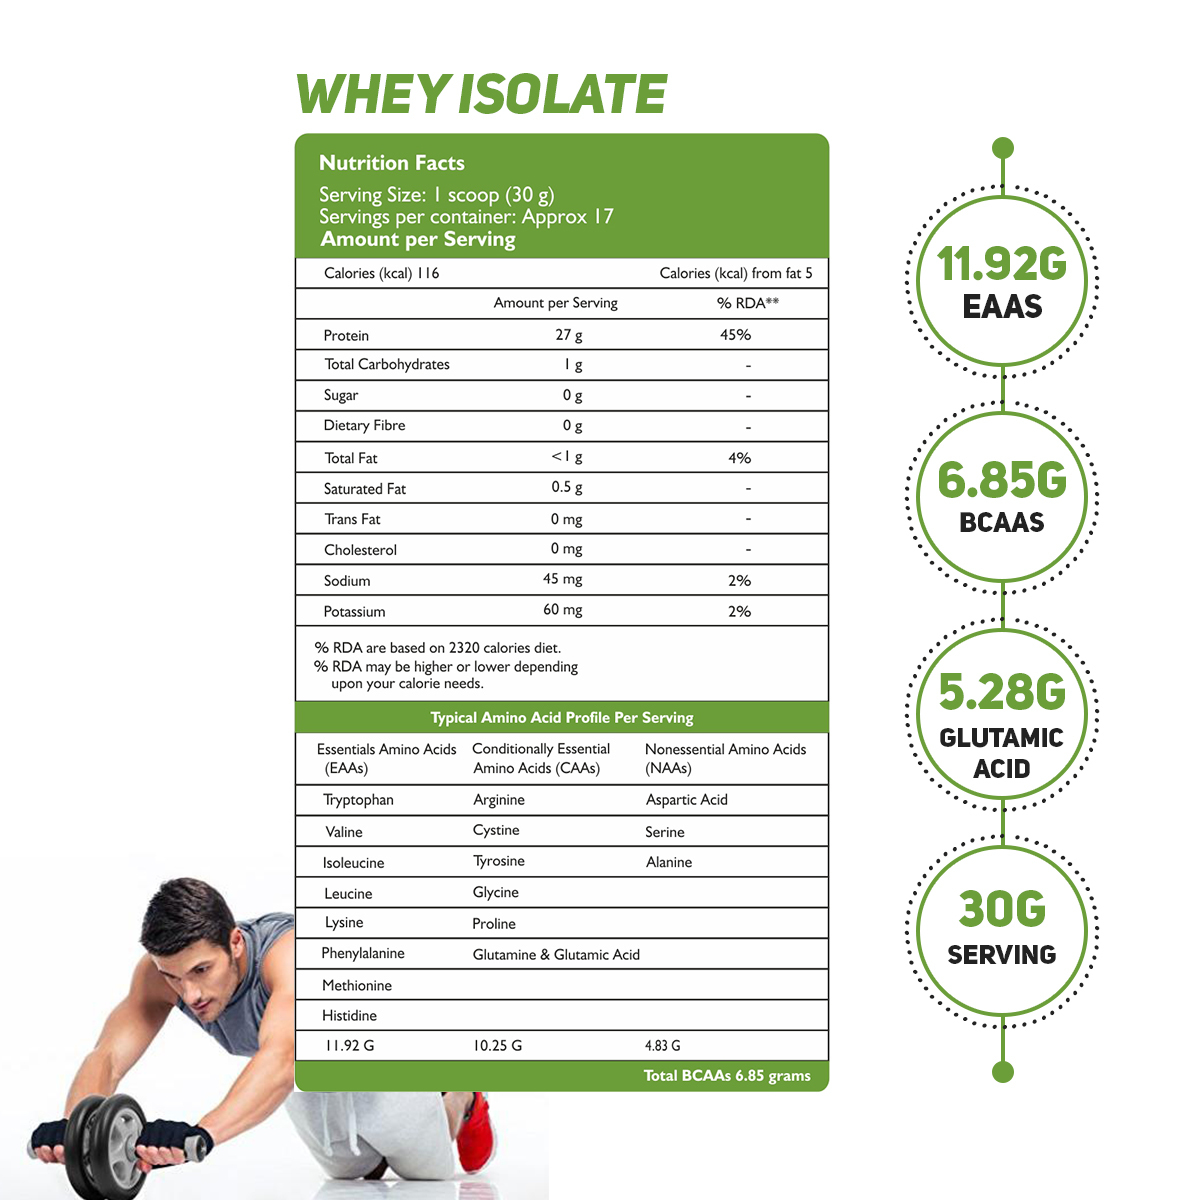 HealthOxide Whey Protein Isolate (Raw & Unflavored / 27 G Protein per Serving) 500 Gm